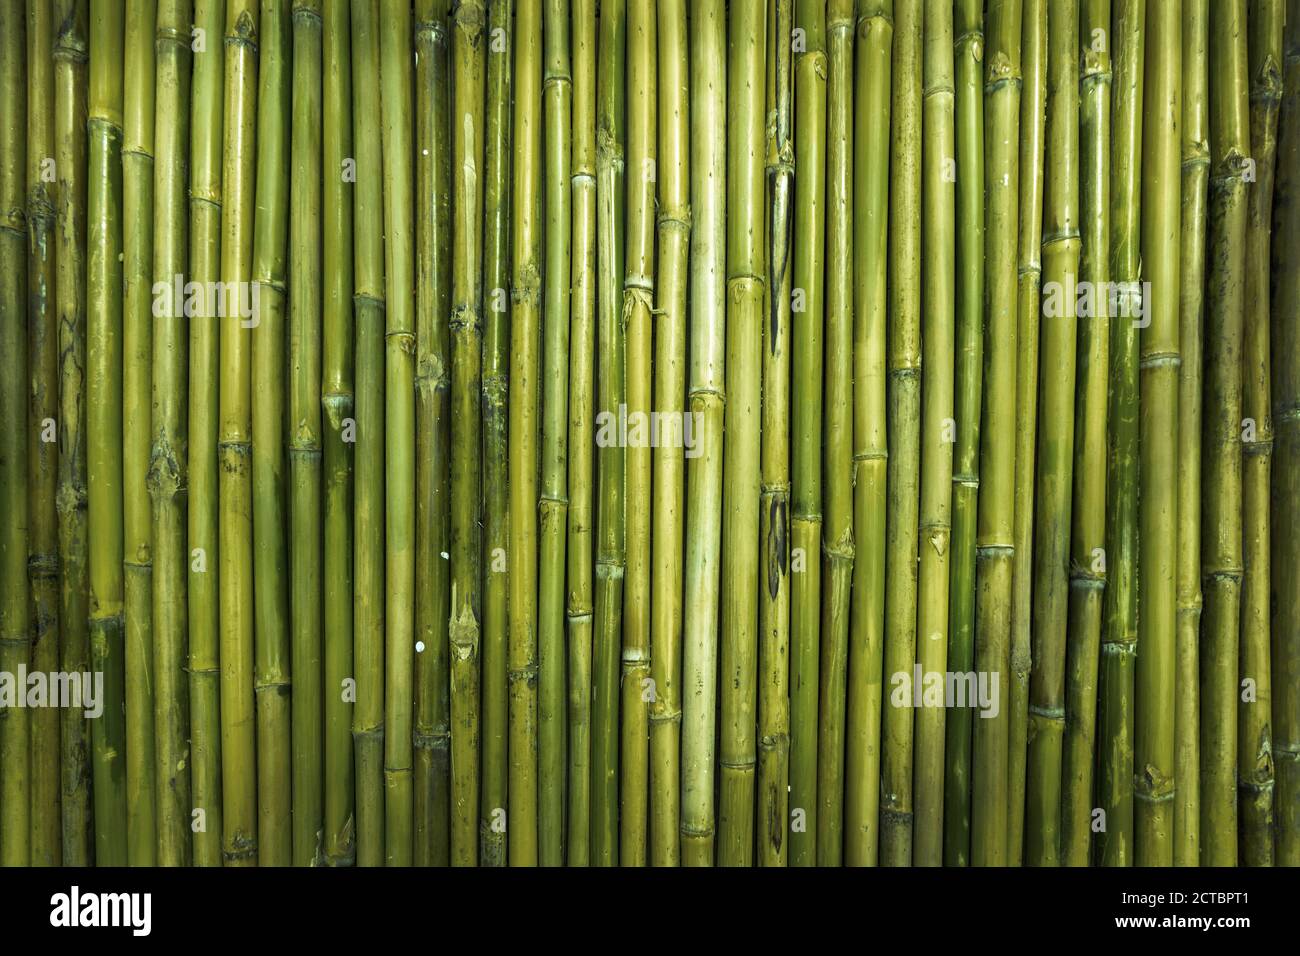 https://c8.alamy.com/comp/2CTBPT1/green-bamboo-wood-texture-for-defence-garden-wall-from-nature-background-concept-2CTBPT1.jpg